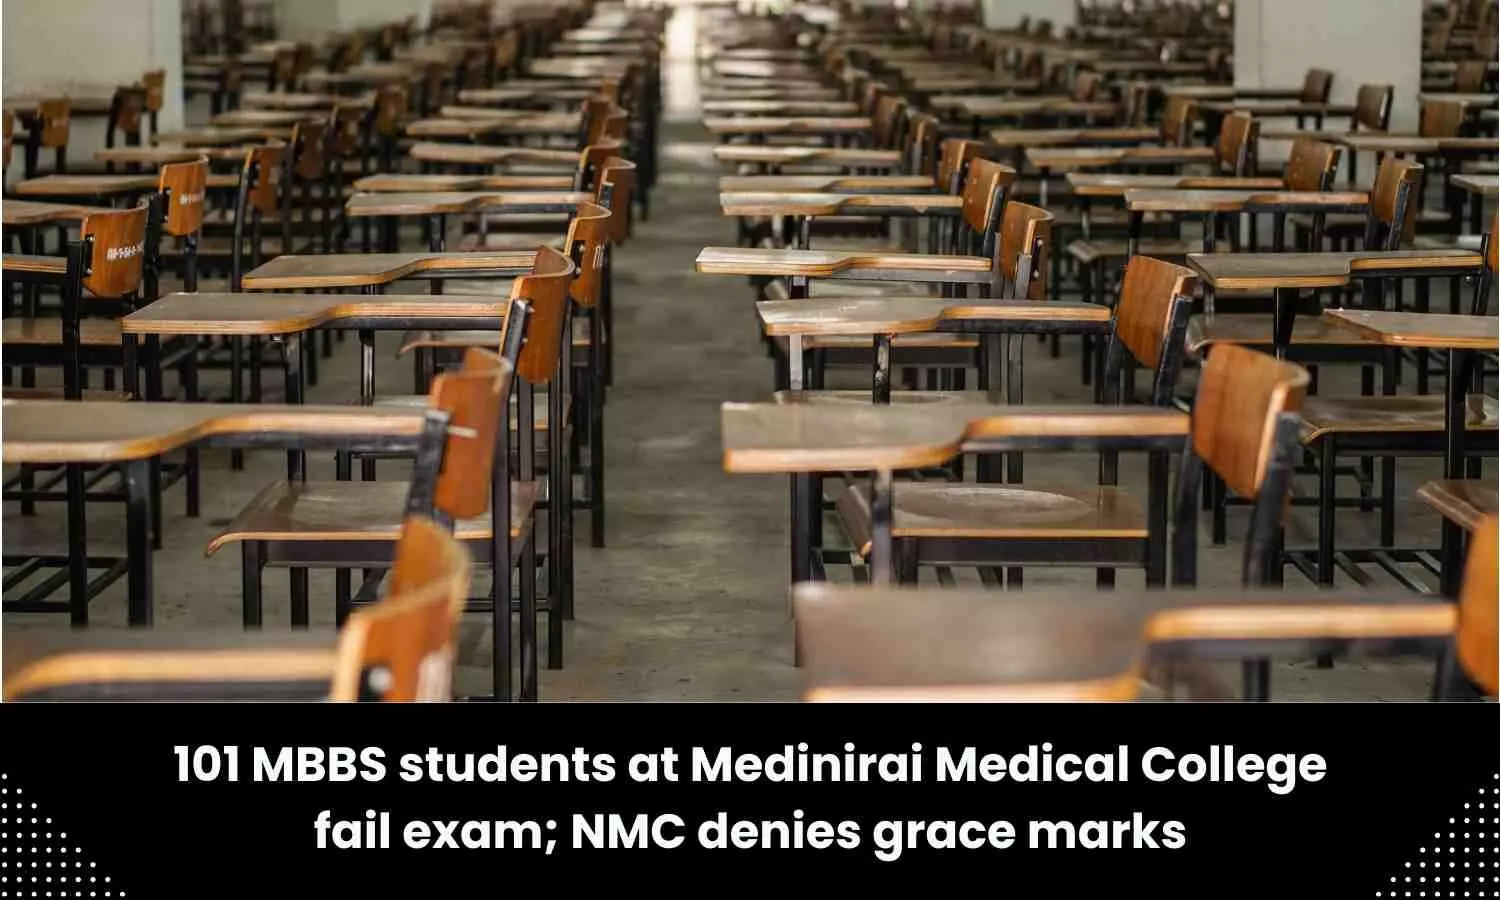 101 MBBS students belonging to Medinirai Medical College and Hospital to re-appear in exam; NMC denies grace marks